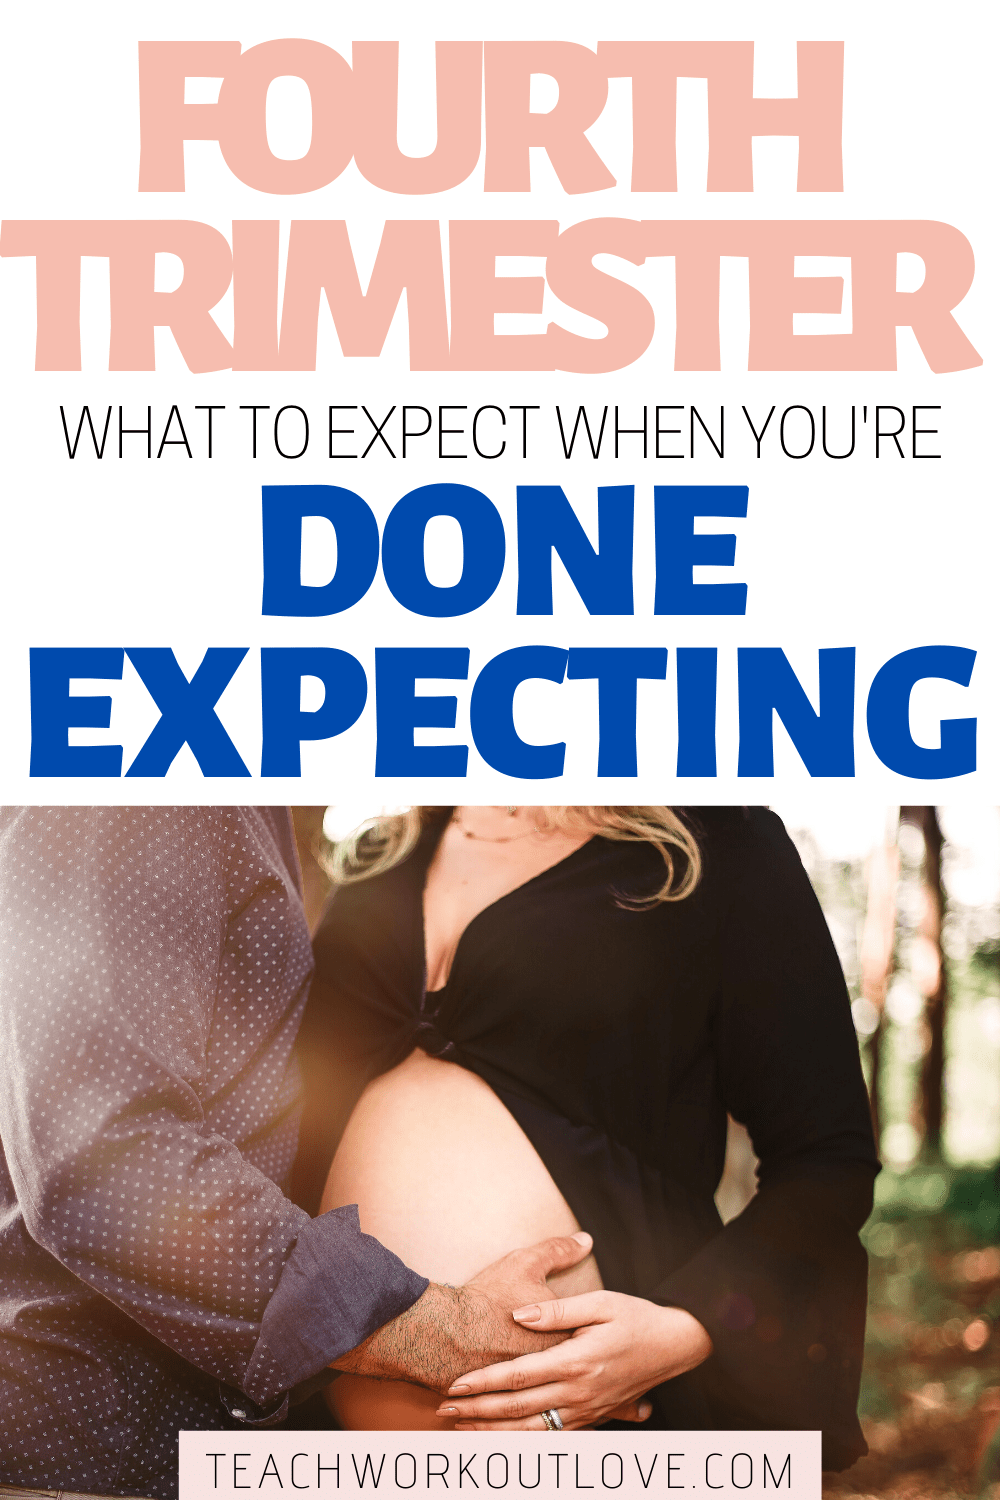 We often treat birth as the “finish line” In this article, we’ll be looking at the fourth trimester and asking, what to expect once you’re done expecting?